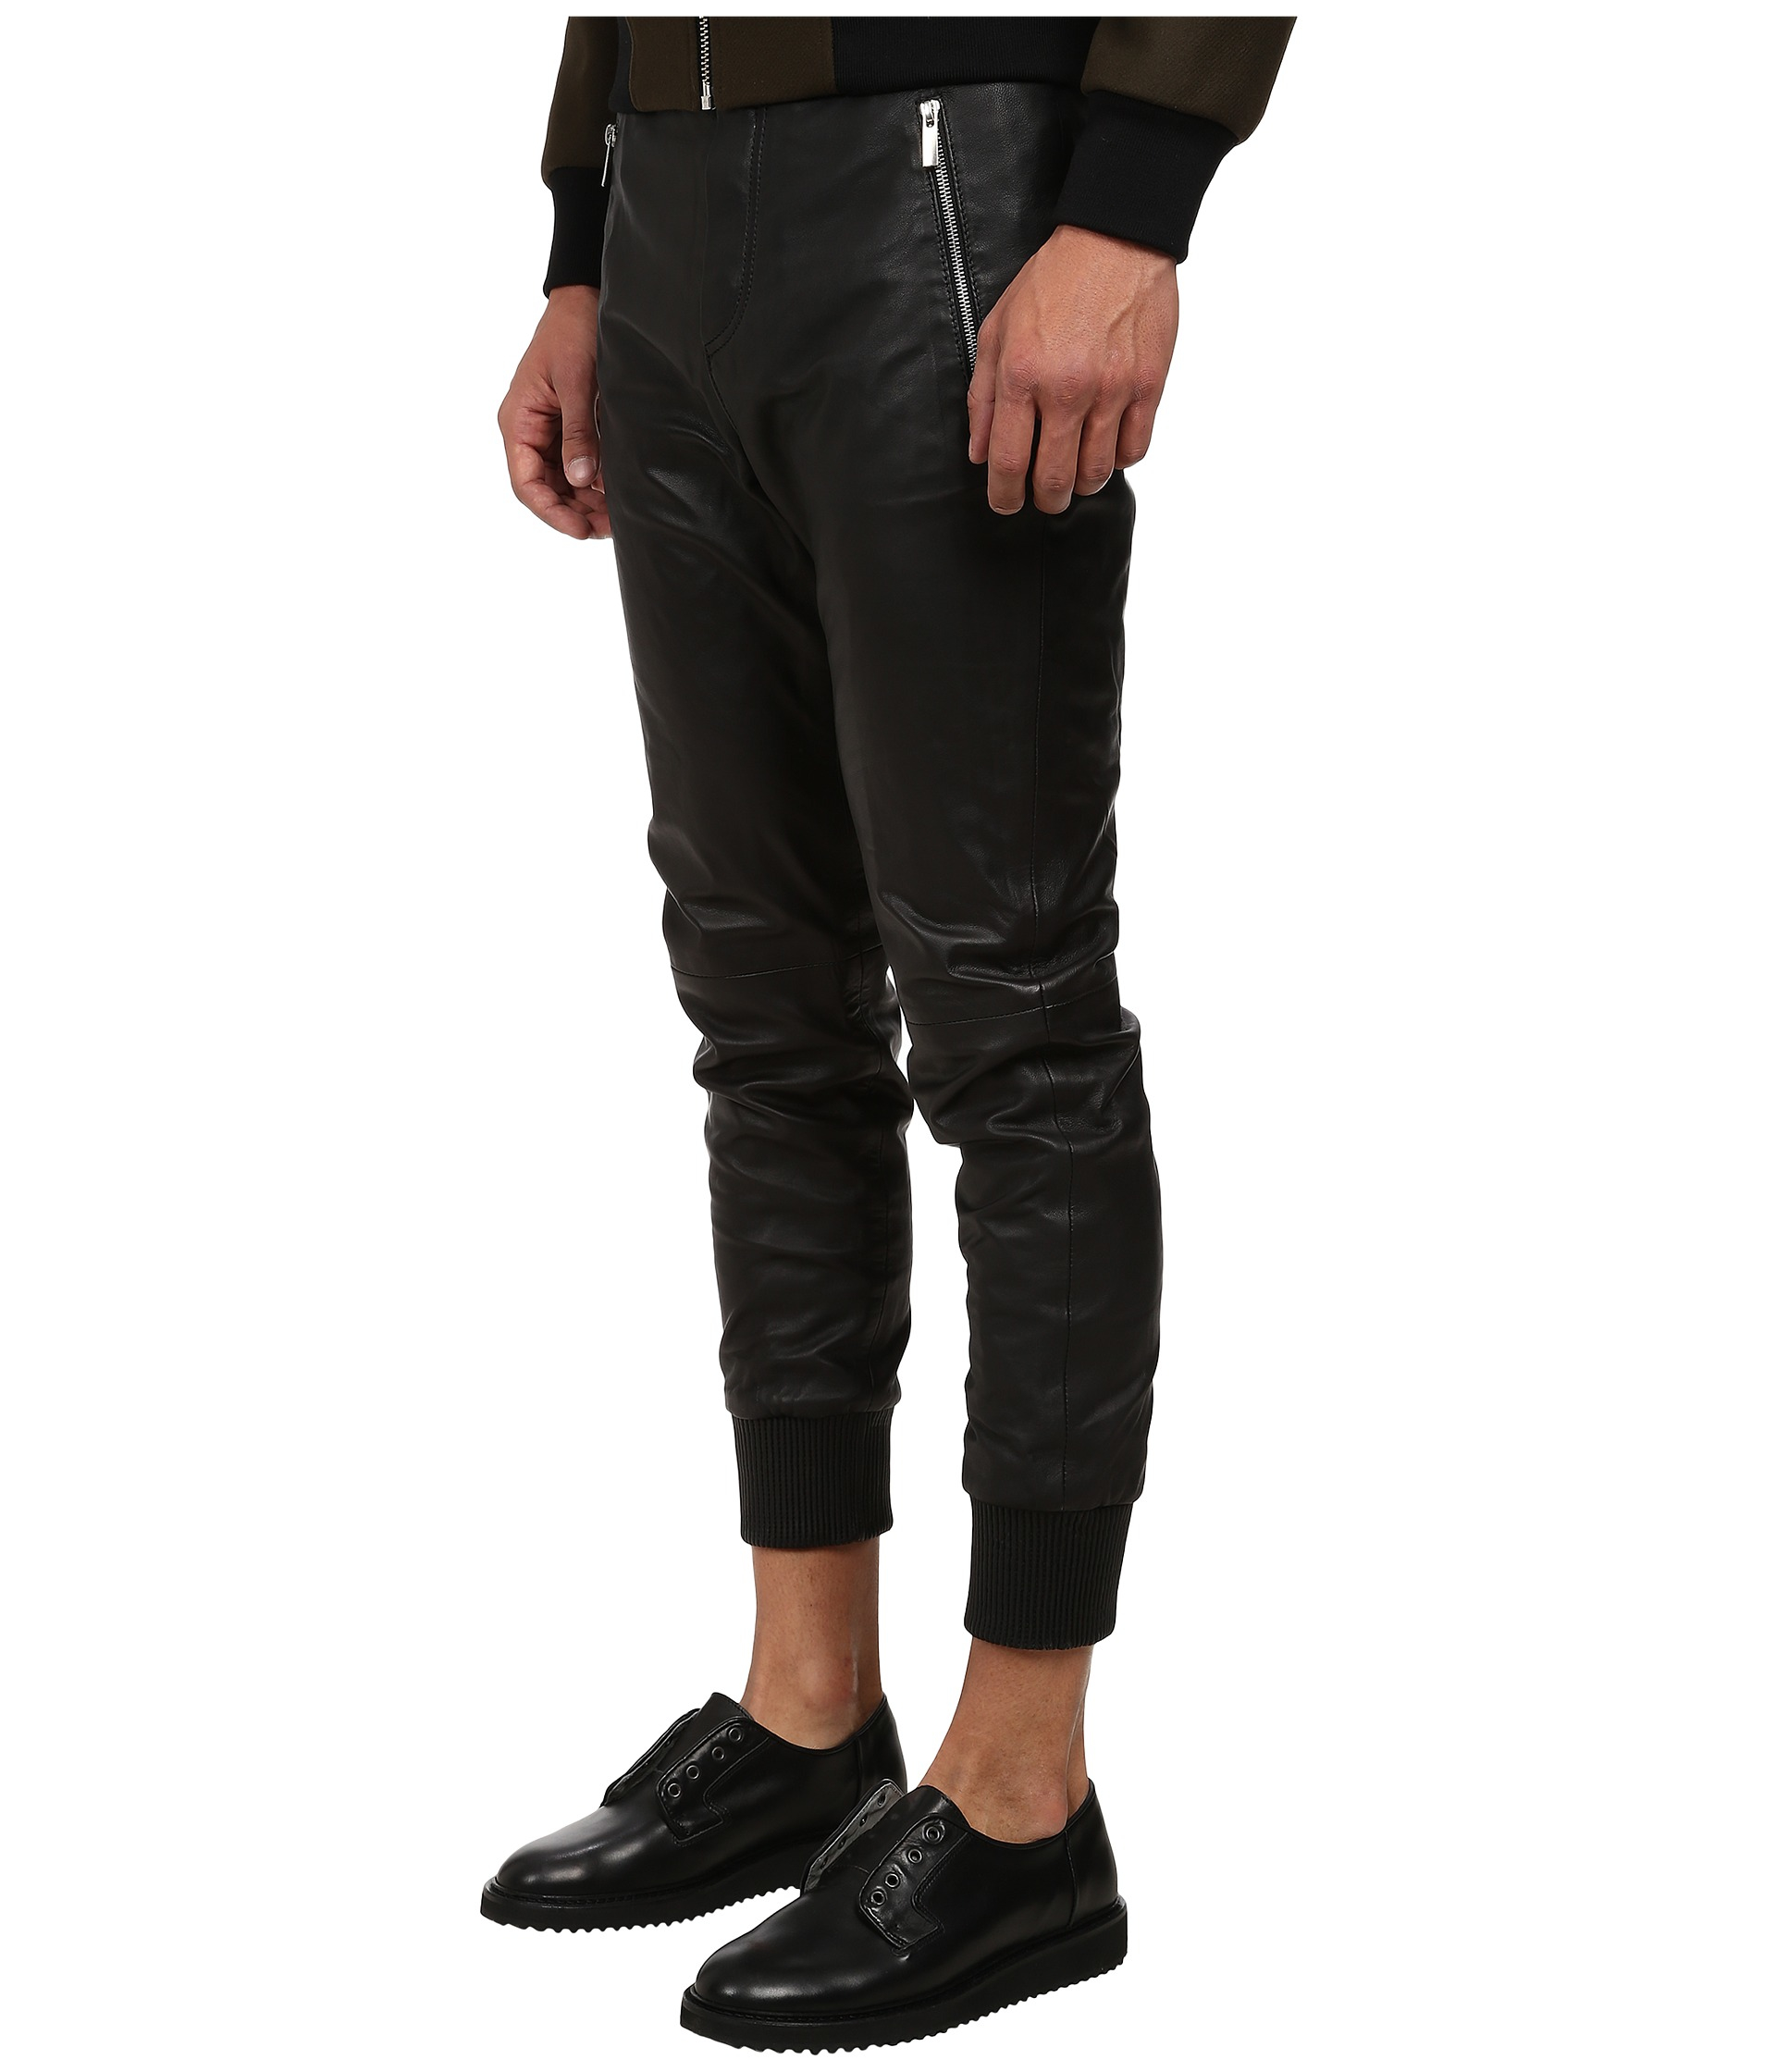 Lyst - The Kooples Sport Light Smooth Leather Pants in Black for Men